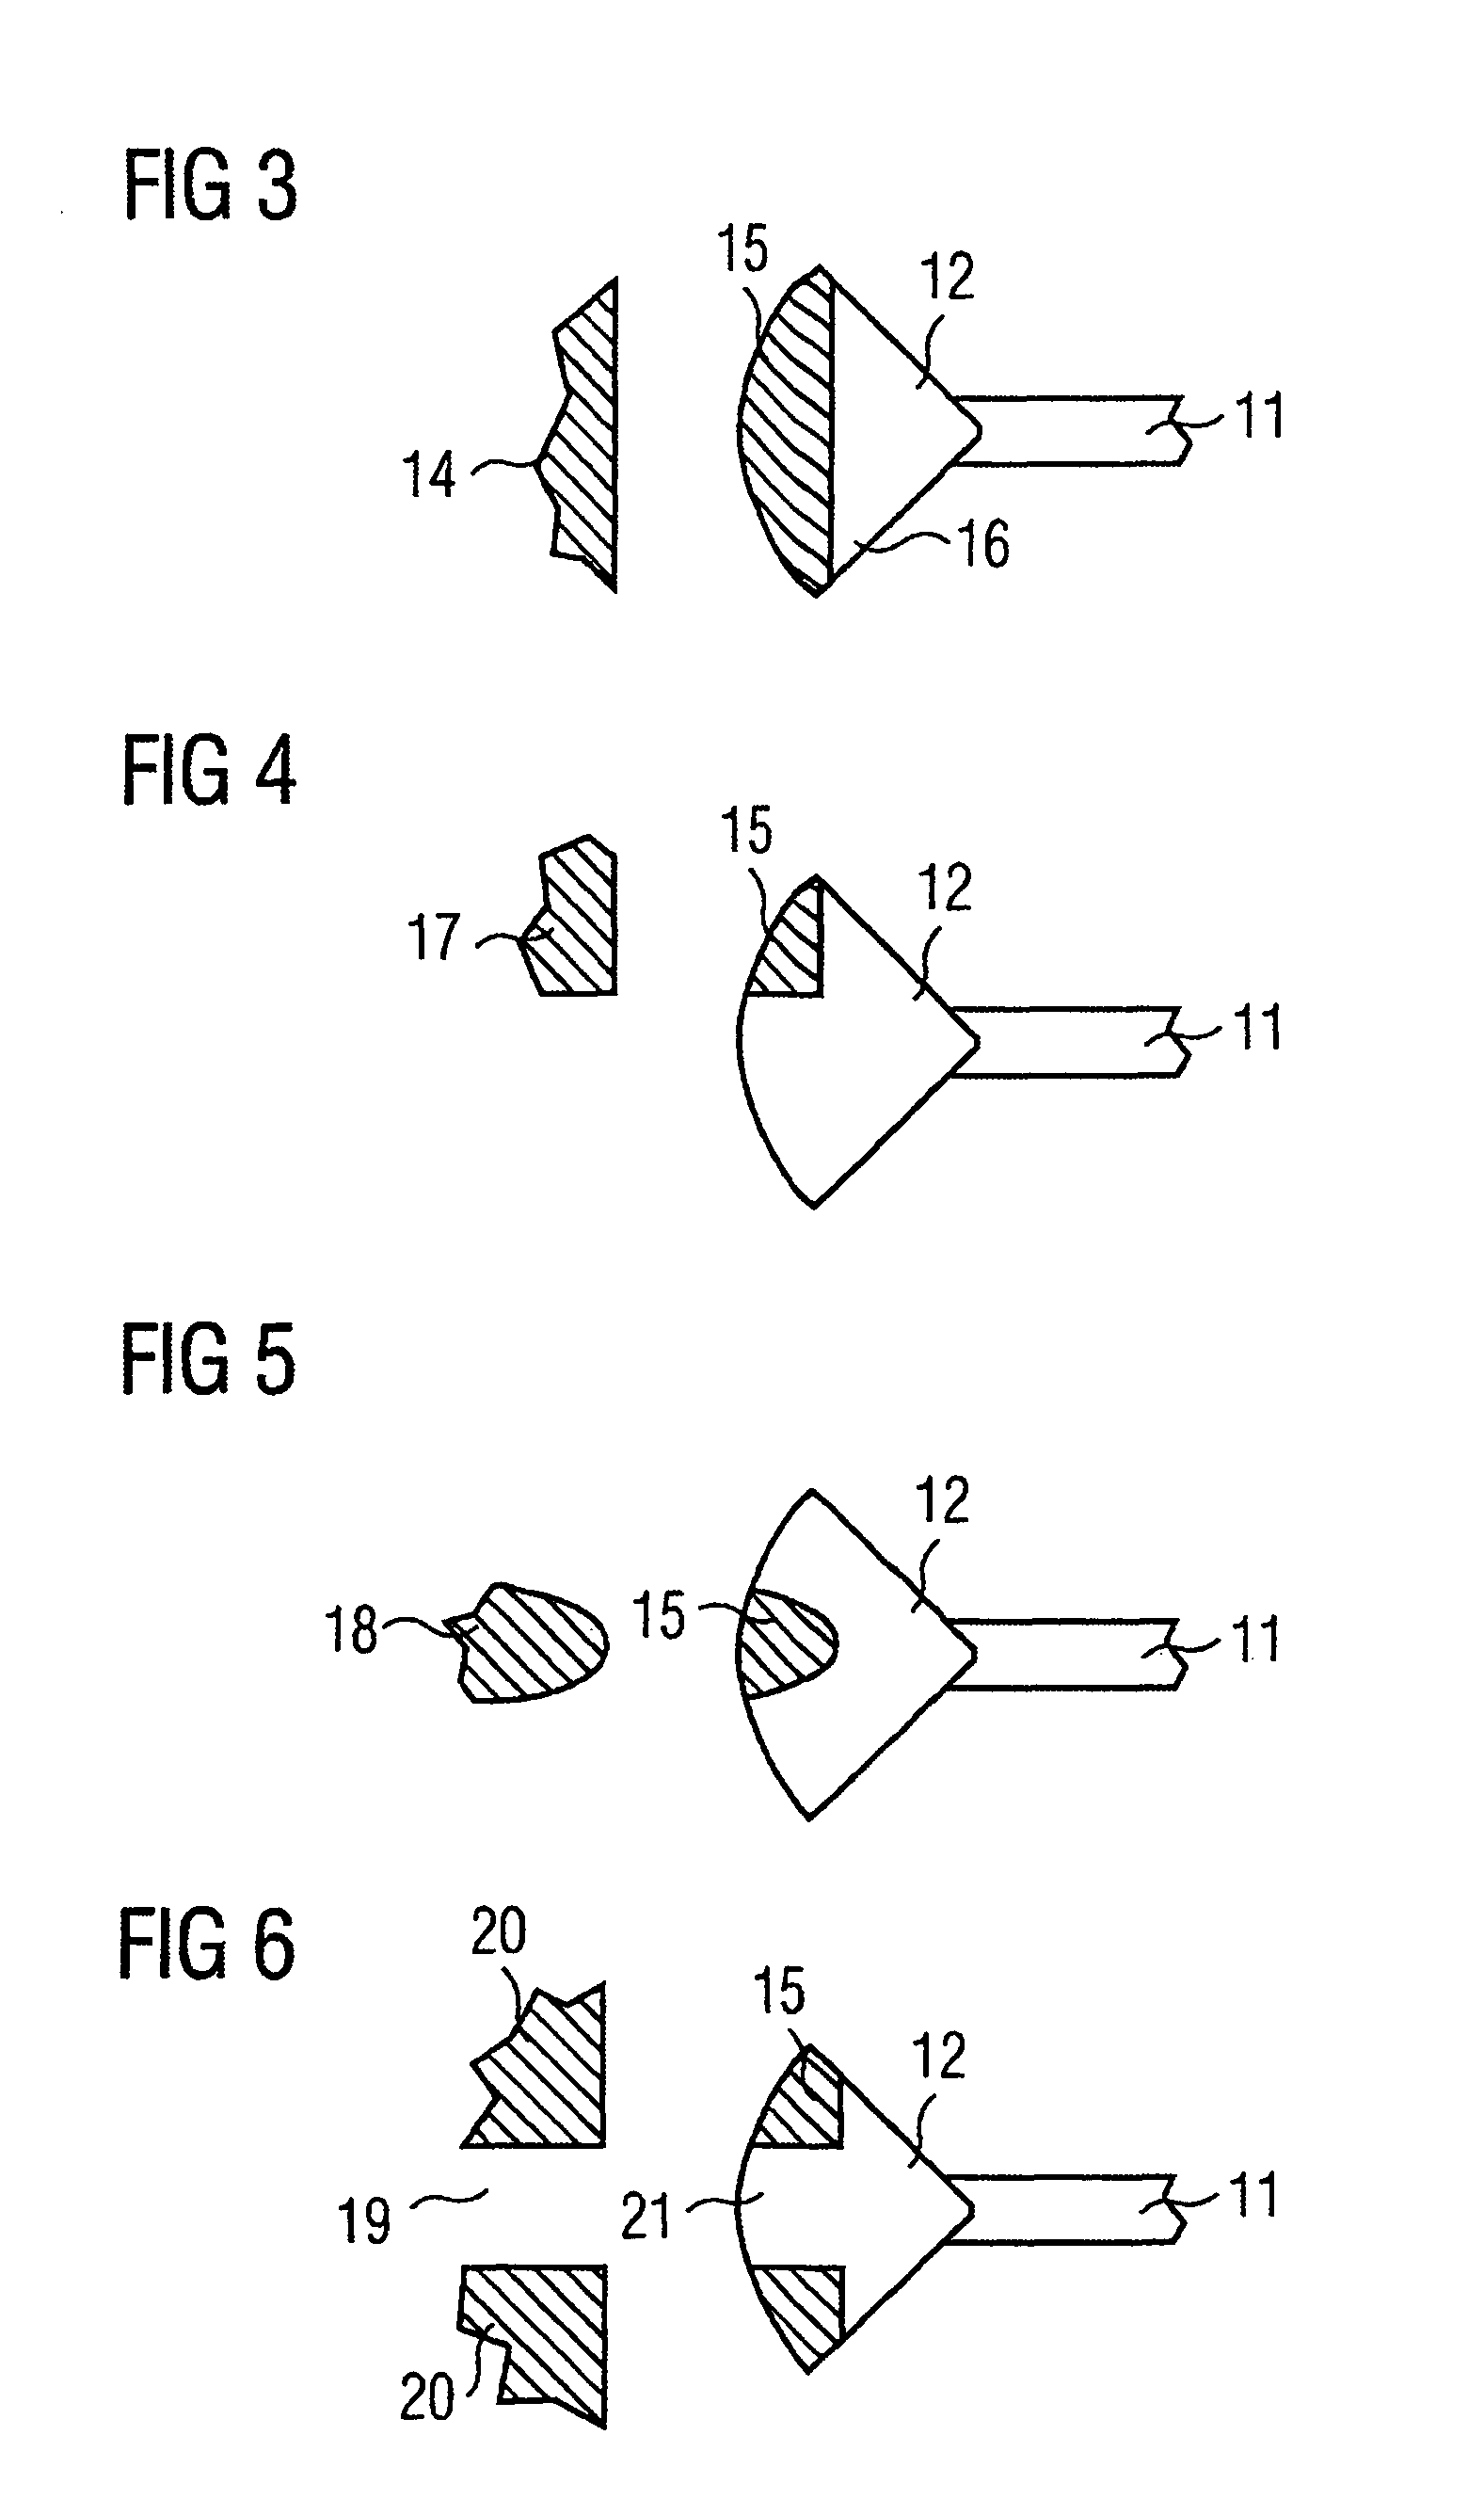 Device for communicating environmental information to a visually impaired person